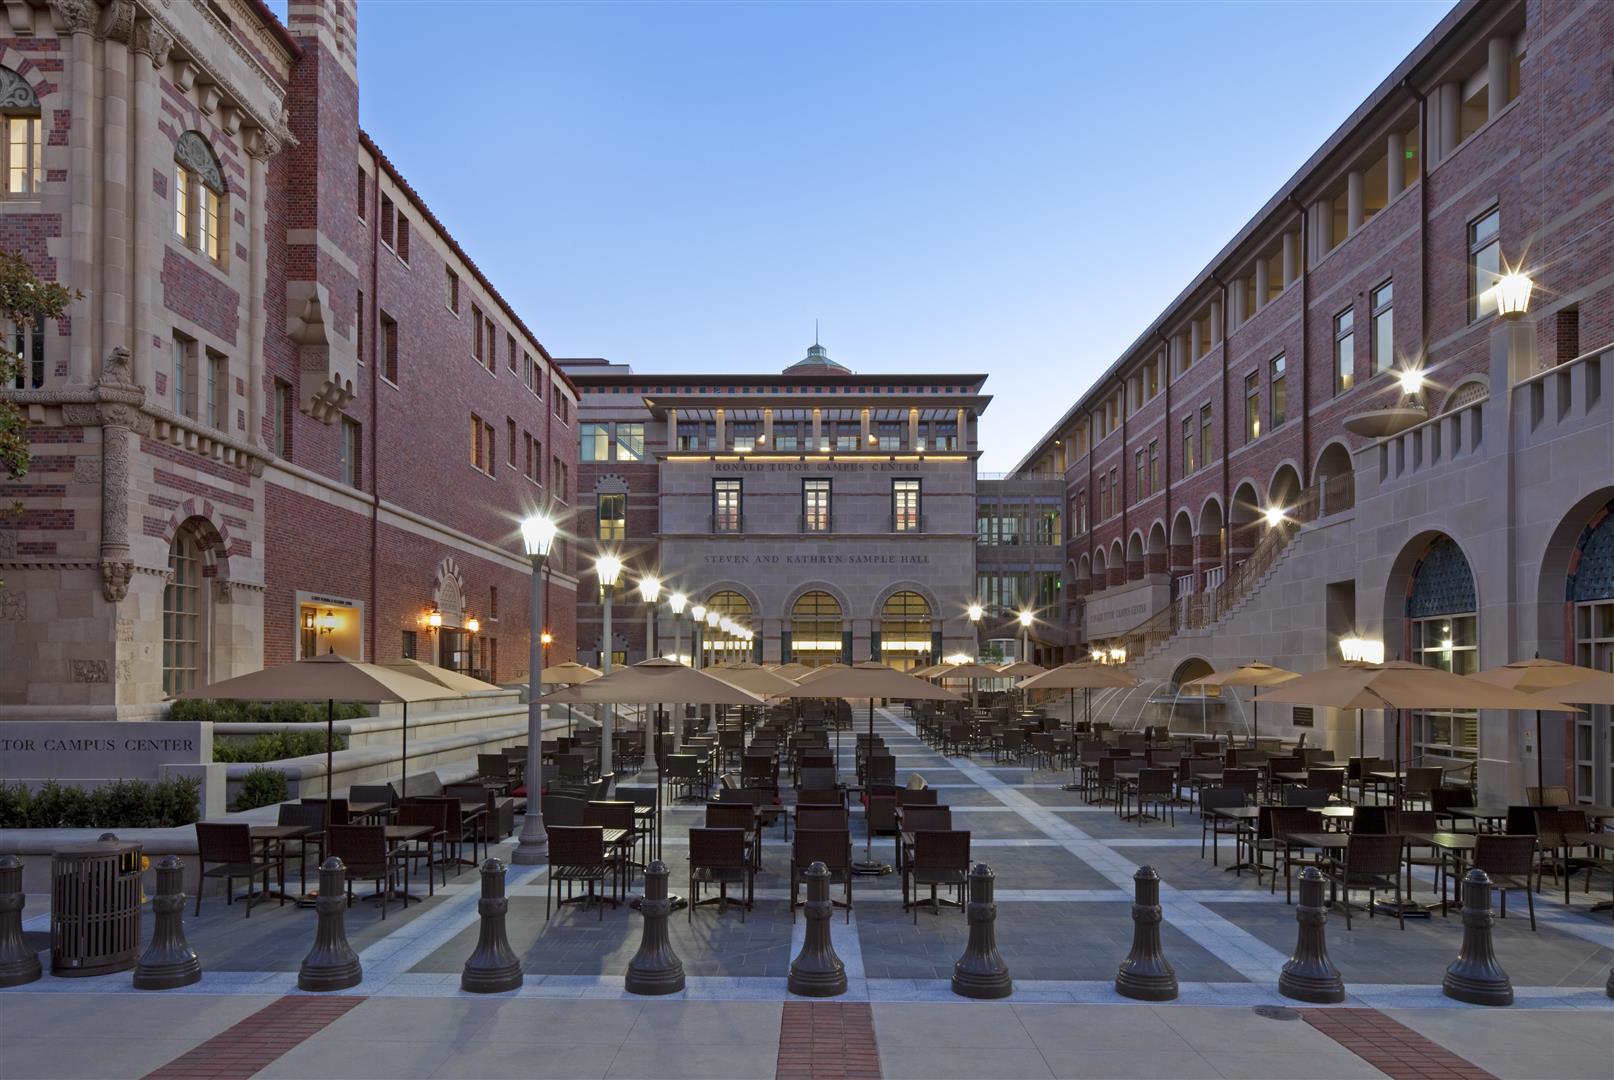 usc group campus tours